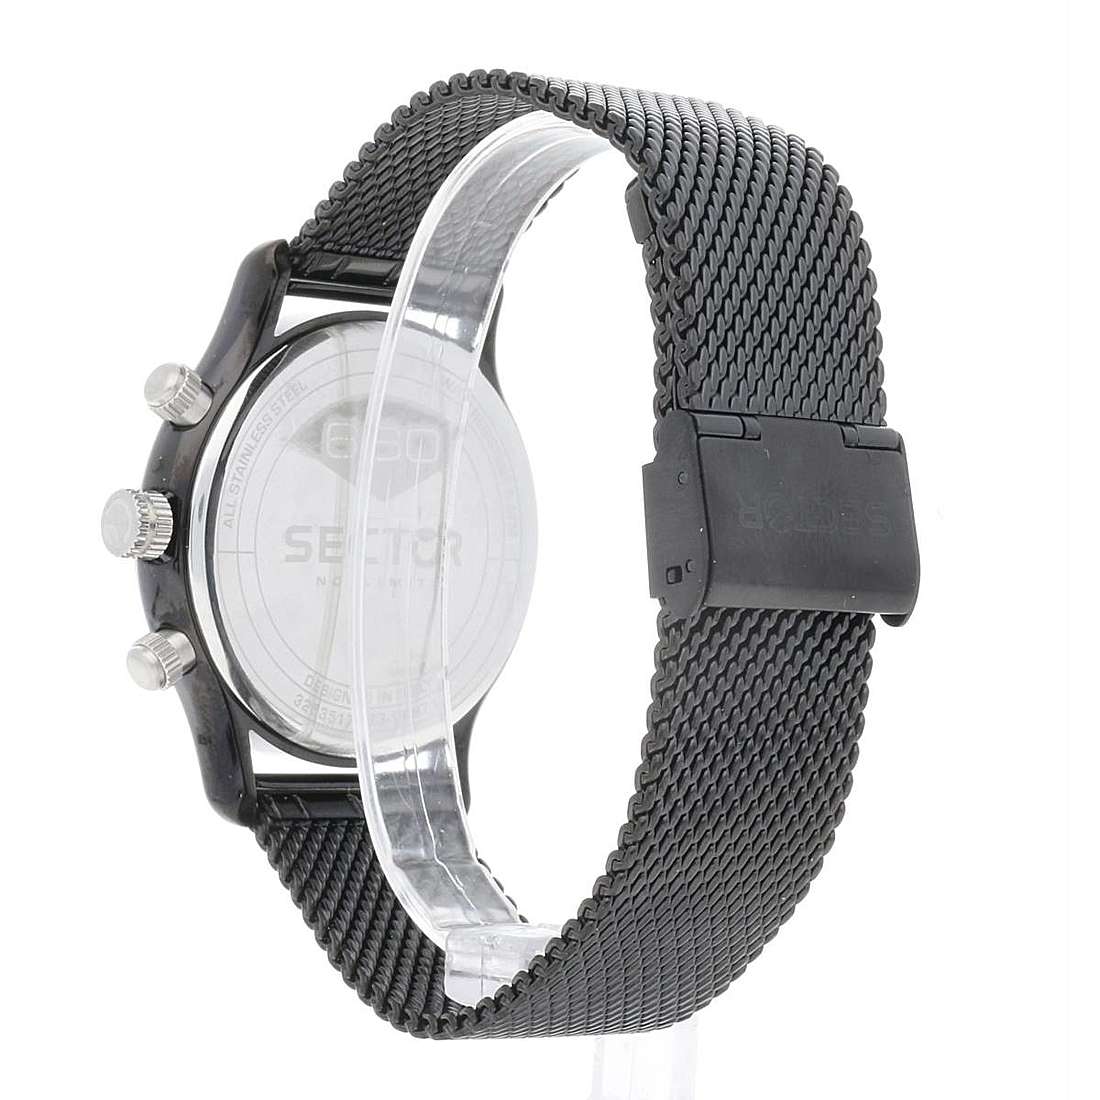 Offres montres homme Sector R3253517003